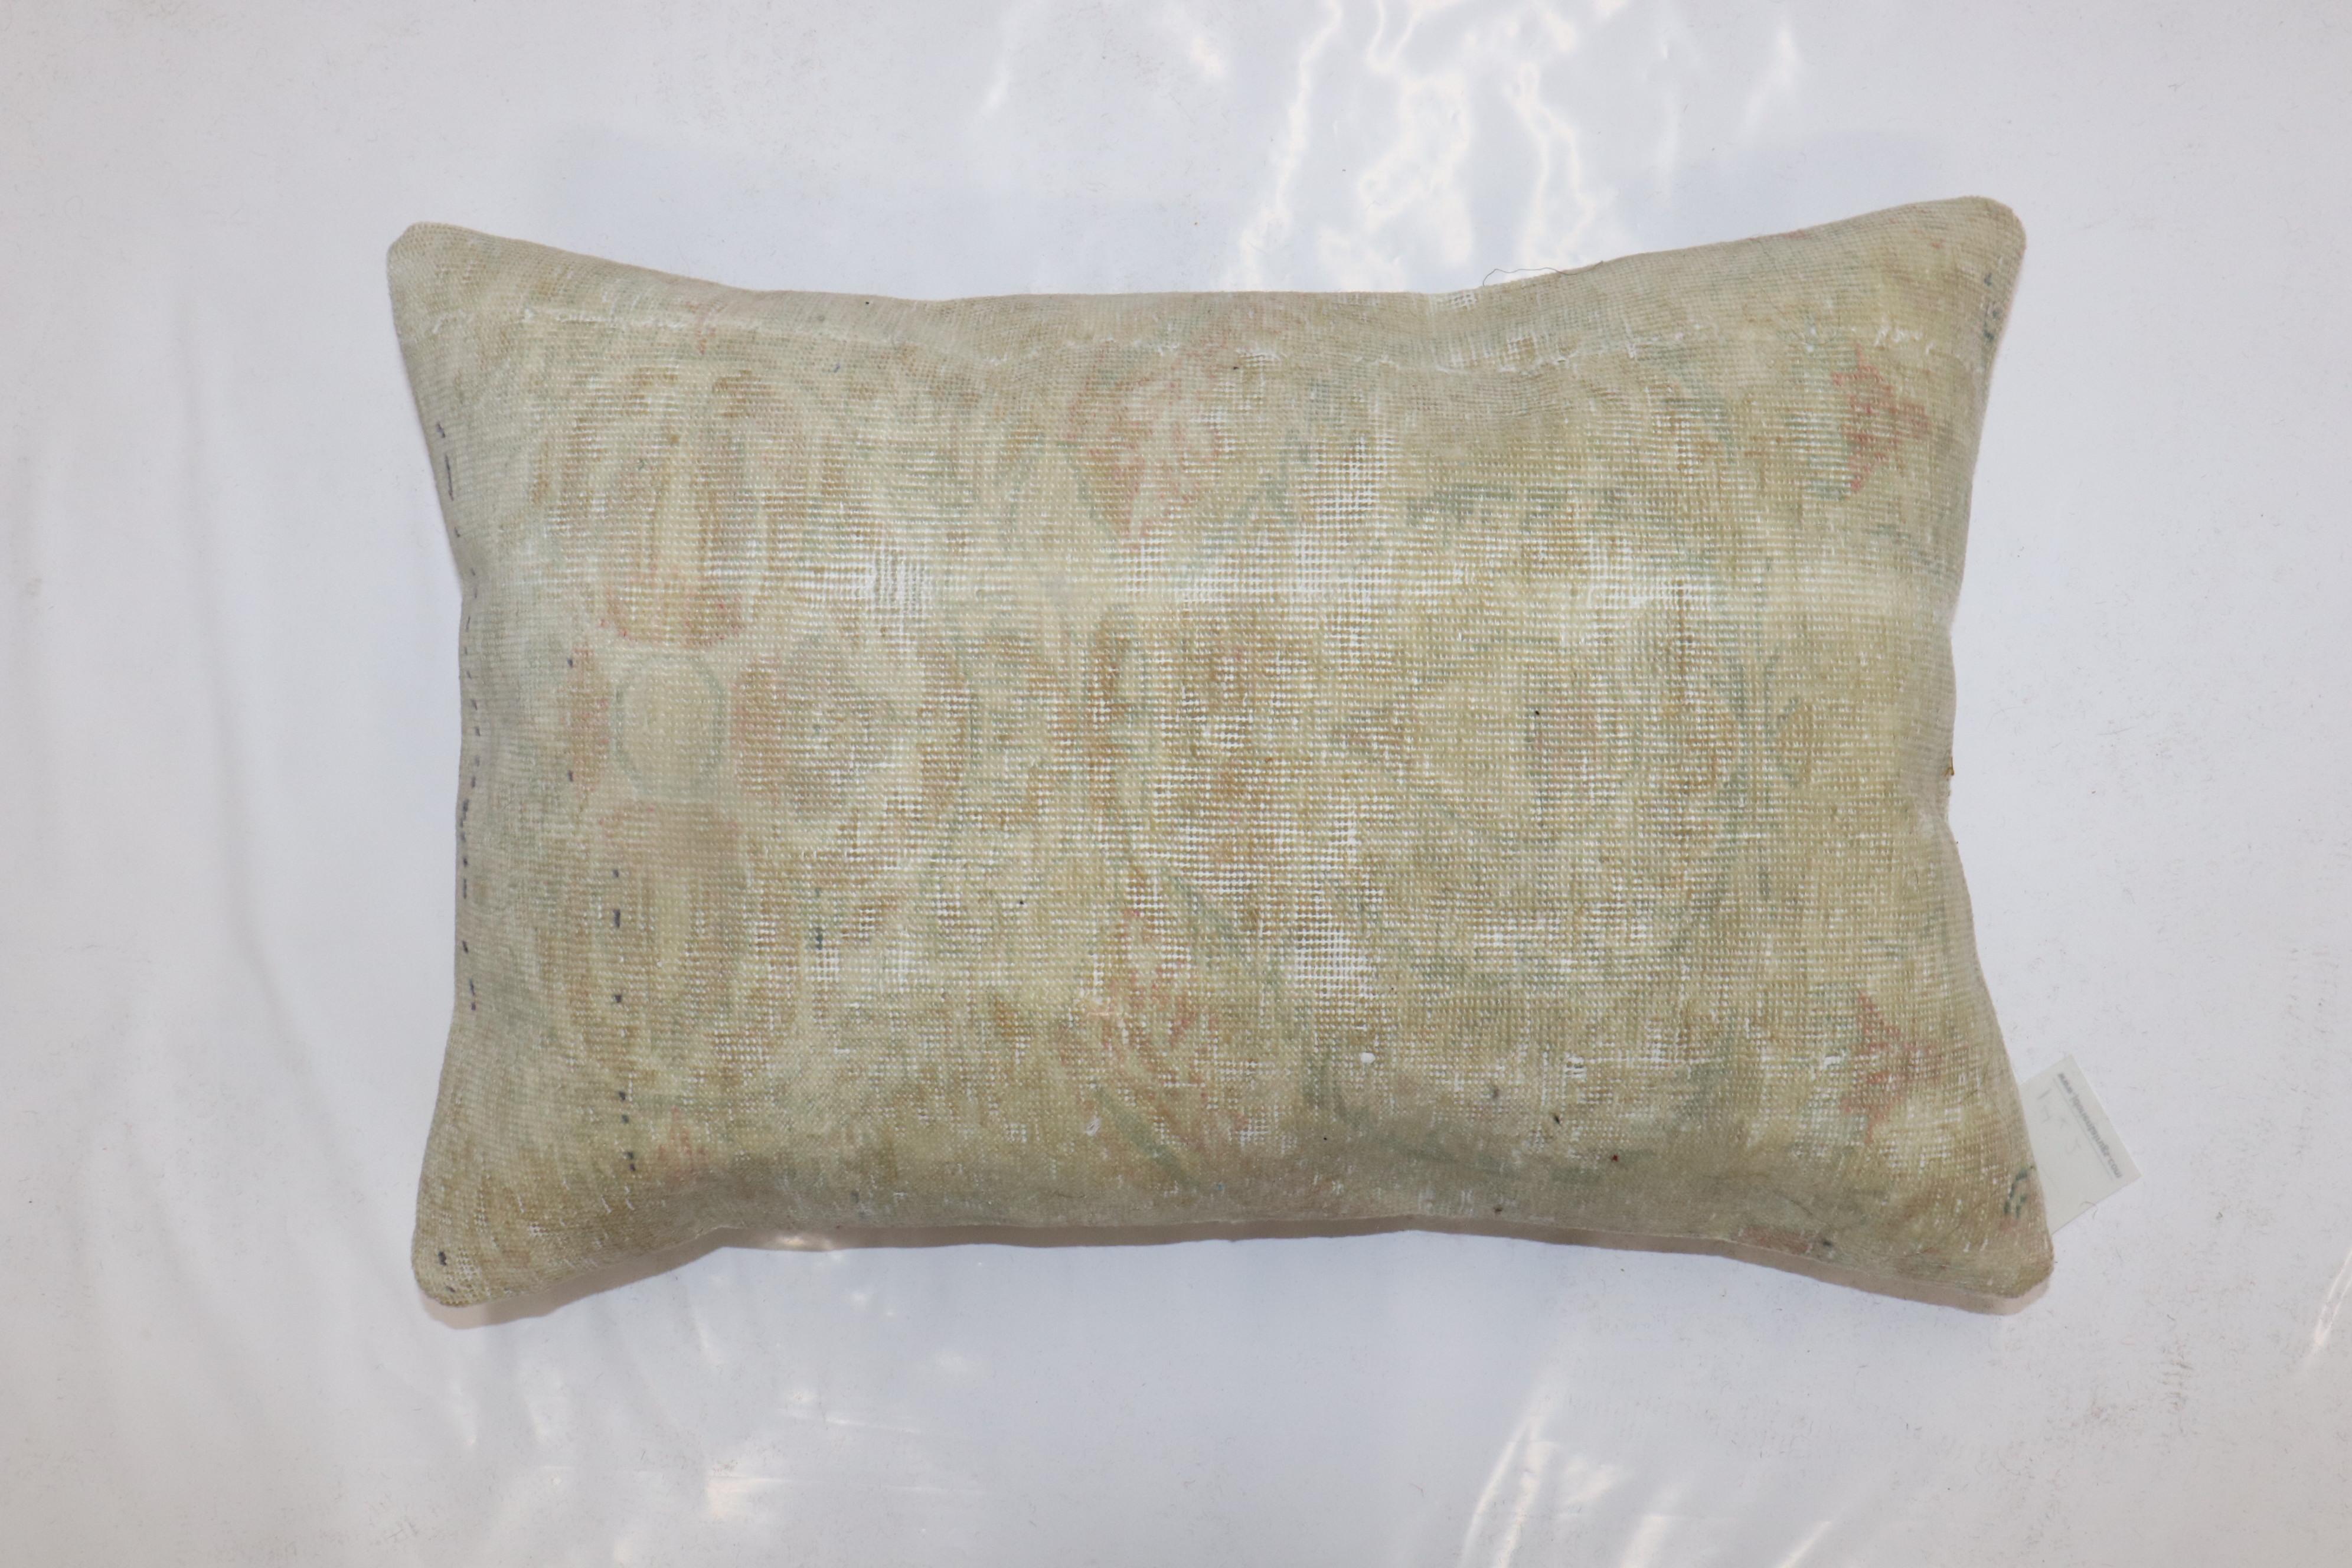 Pillow made from a mid-20th-century Turkish Sivas rug in a bolster size. zipper closure and polyfill insert provided

Measures: 16'' x 24''.